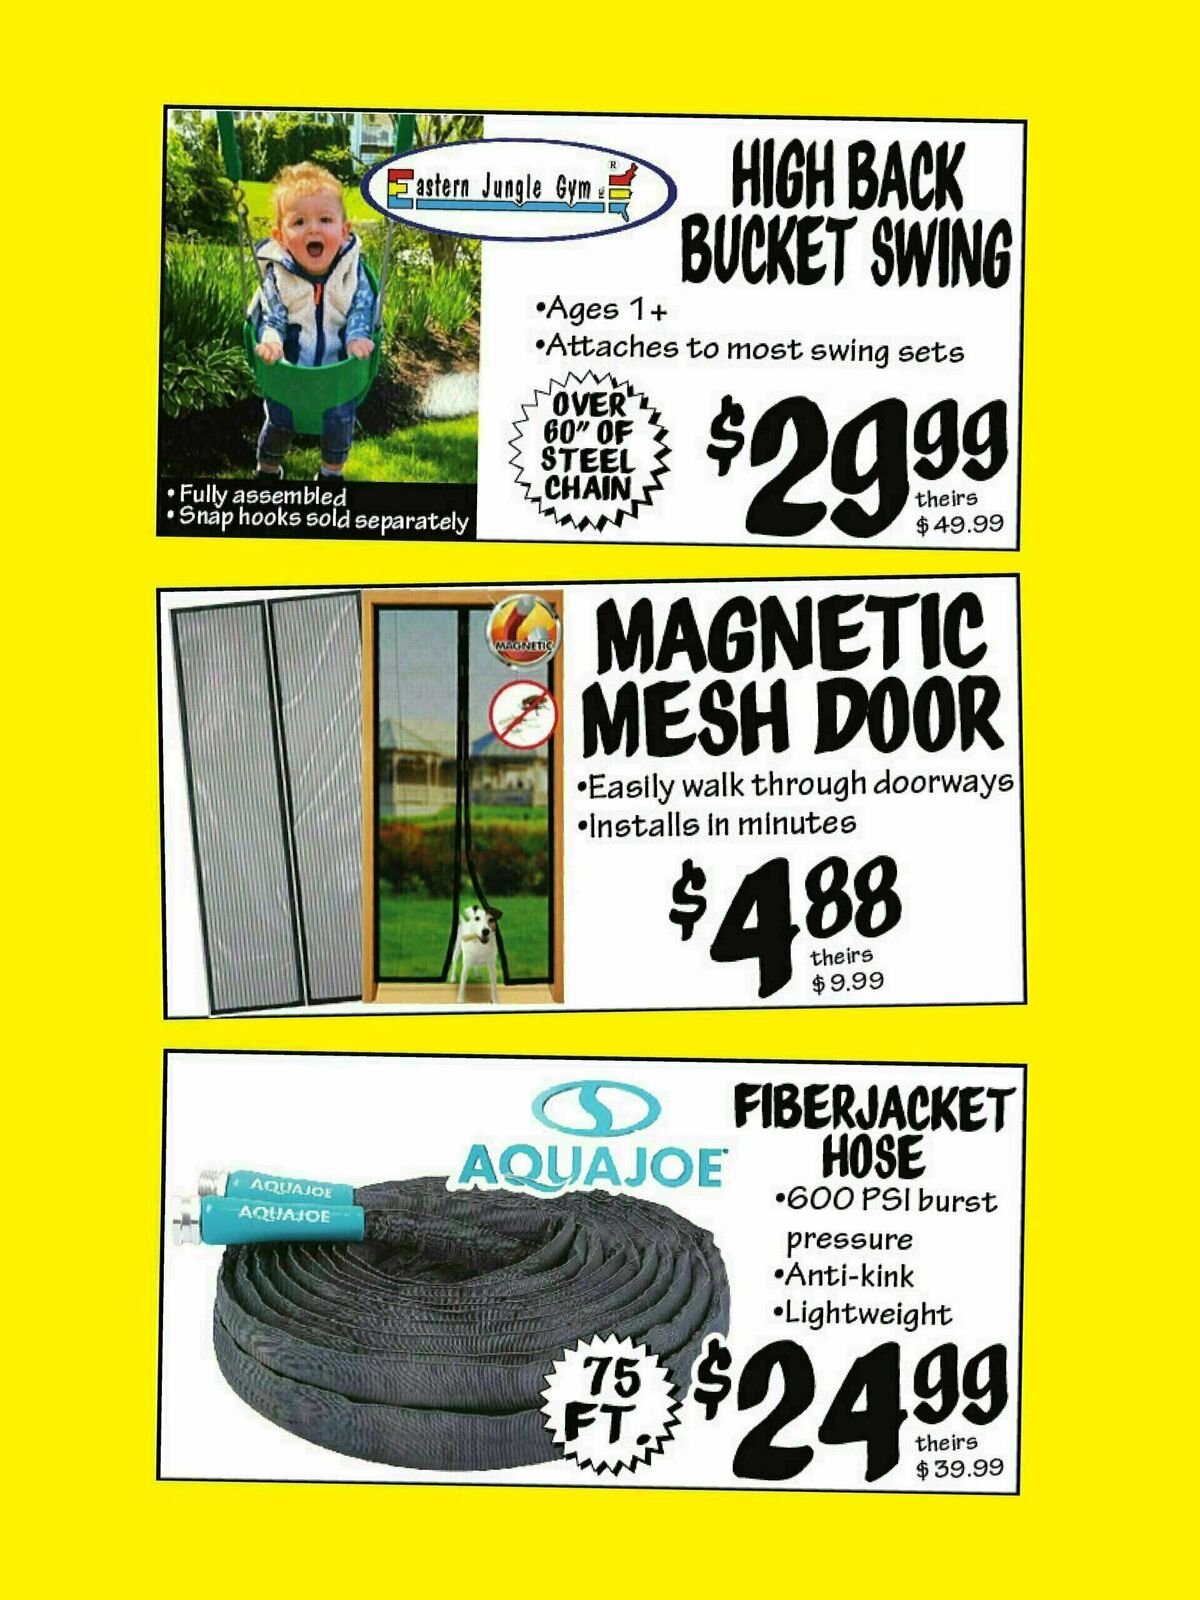 Ollie's Bargain Outlet Weekly Ad from June 22